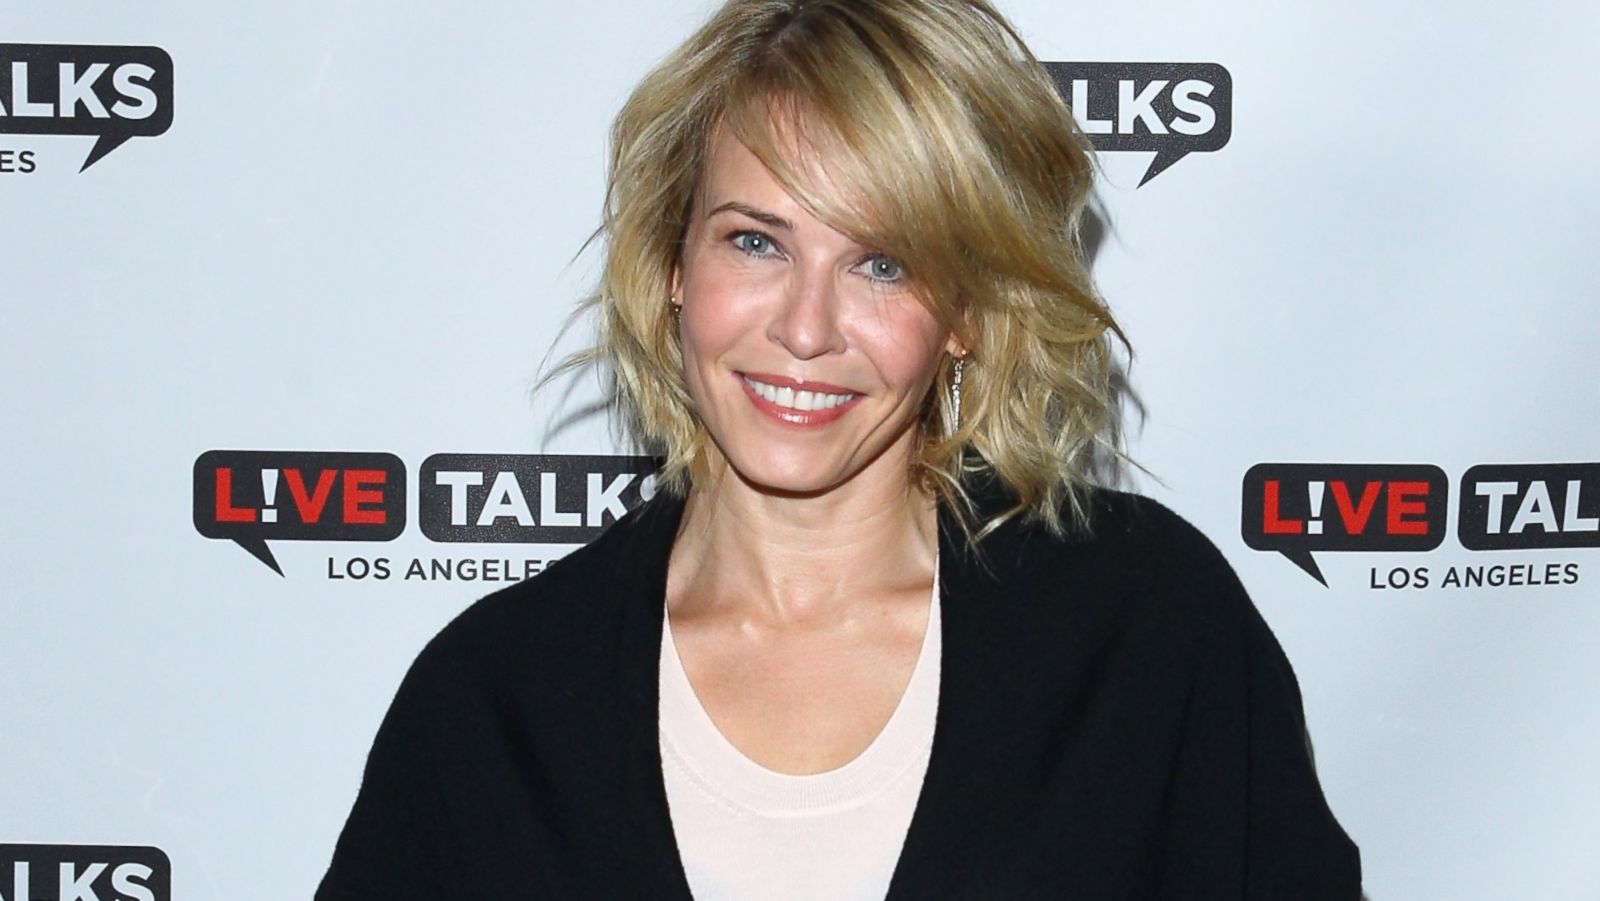 Chelsea Handler Will End Her Talk Show in August - ABC News